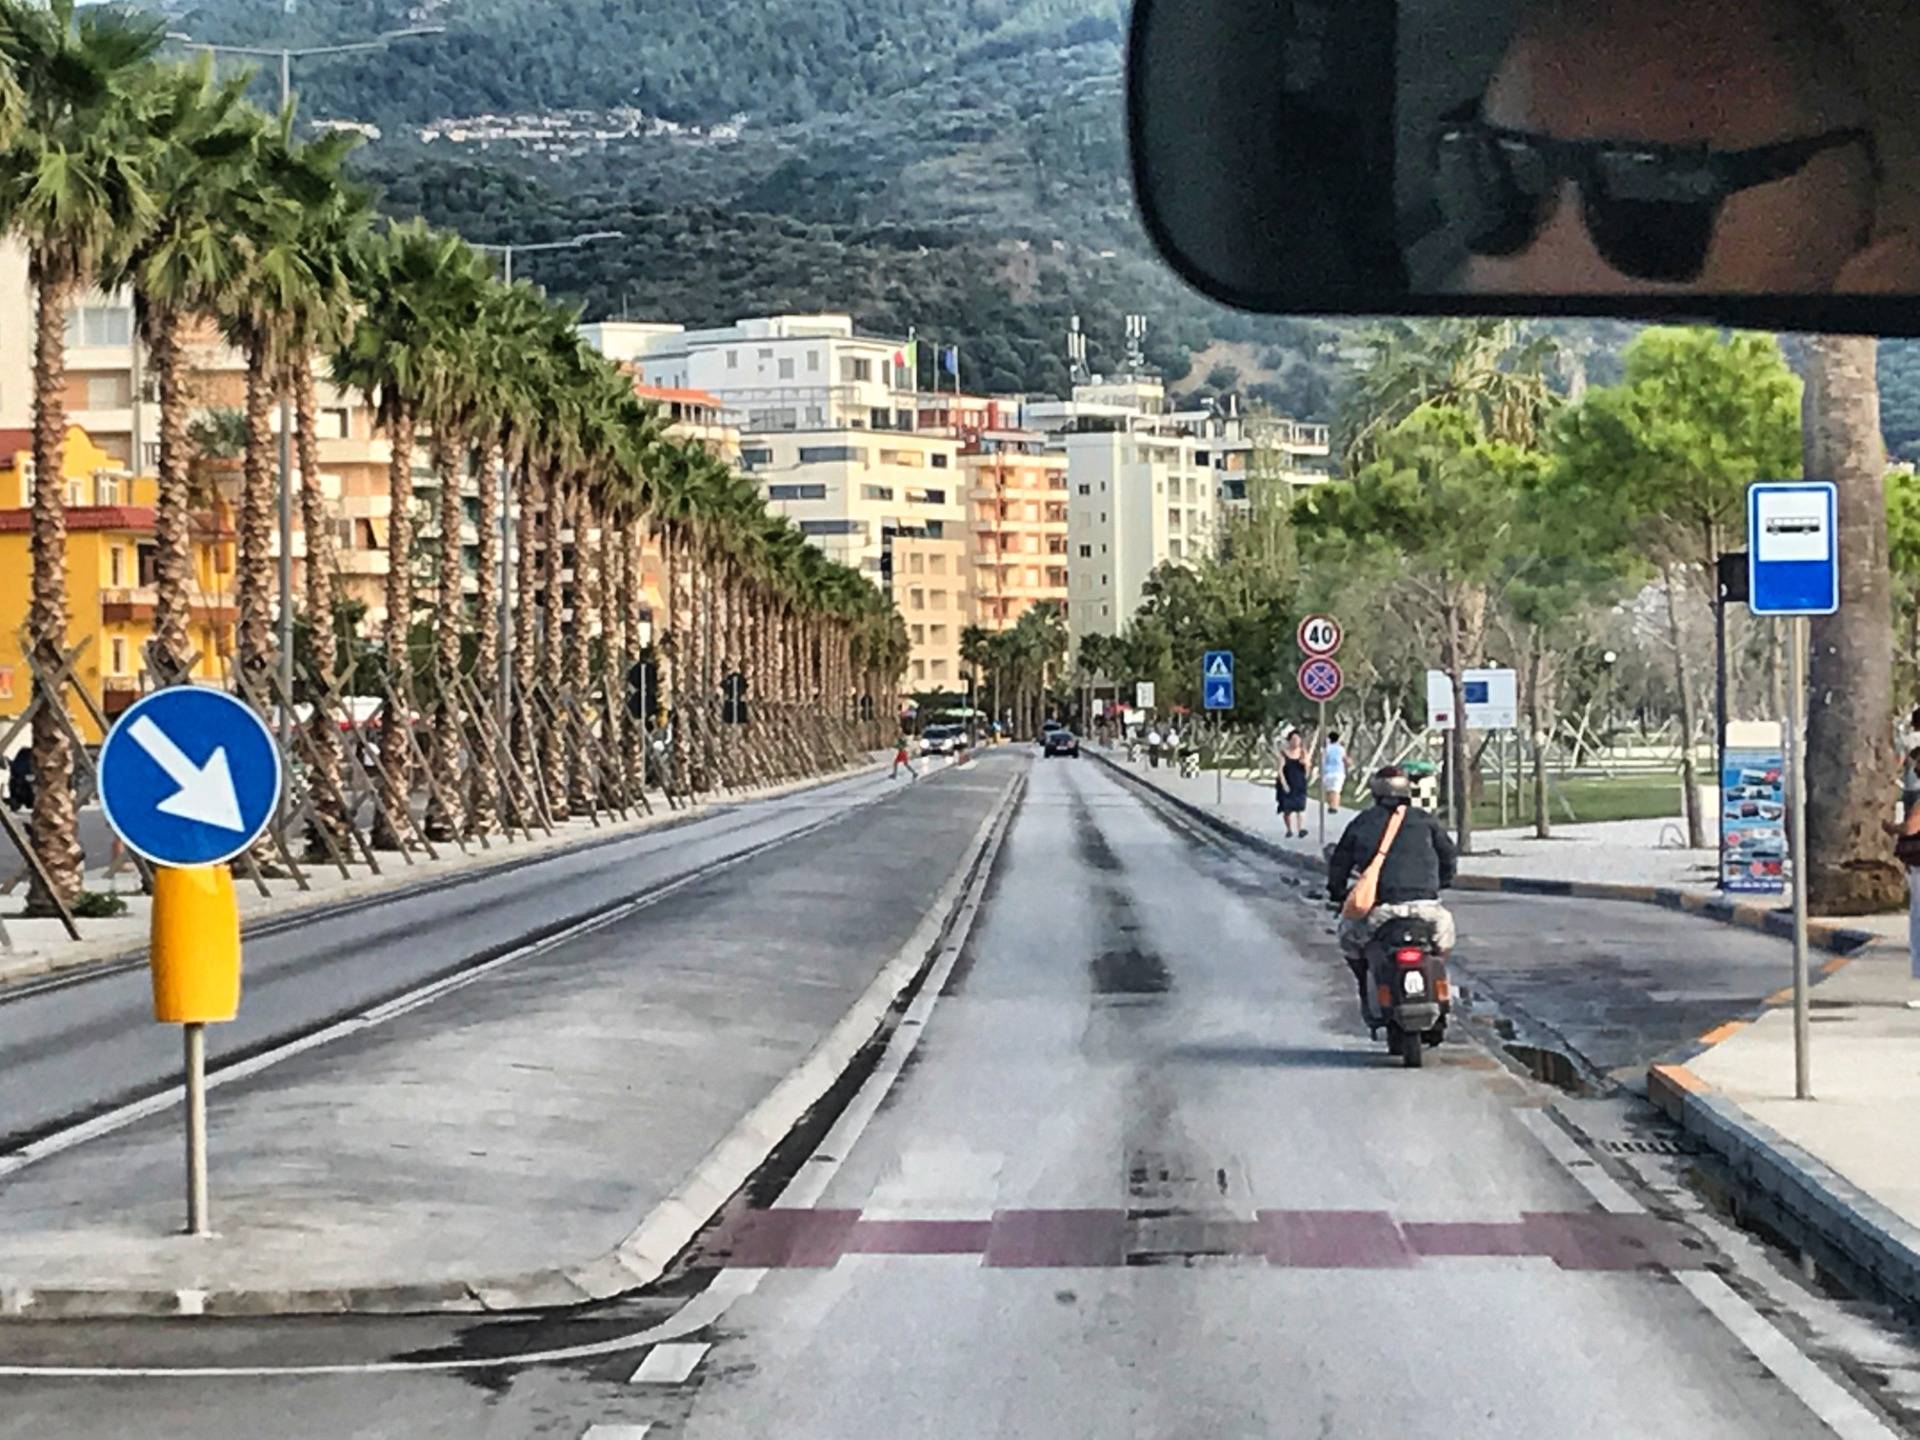 Palms and empty streets - Albania is different from anything